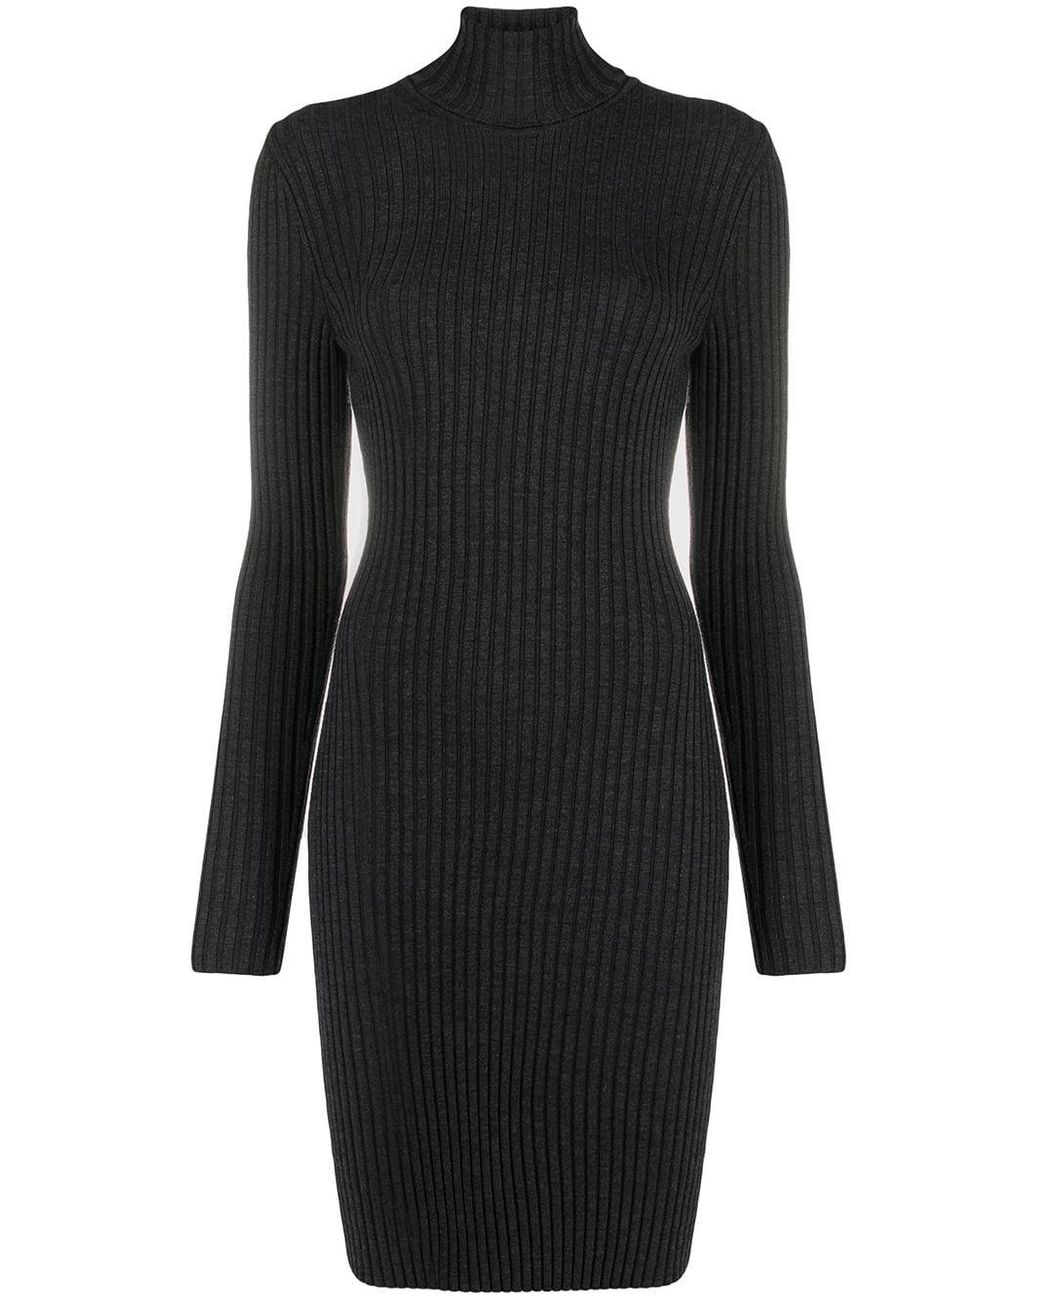 Wolford Ribbed Knit Turtleneck Dress in Grey (Gray) - Lyst